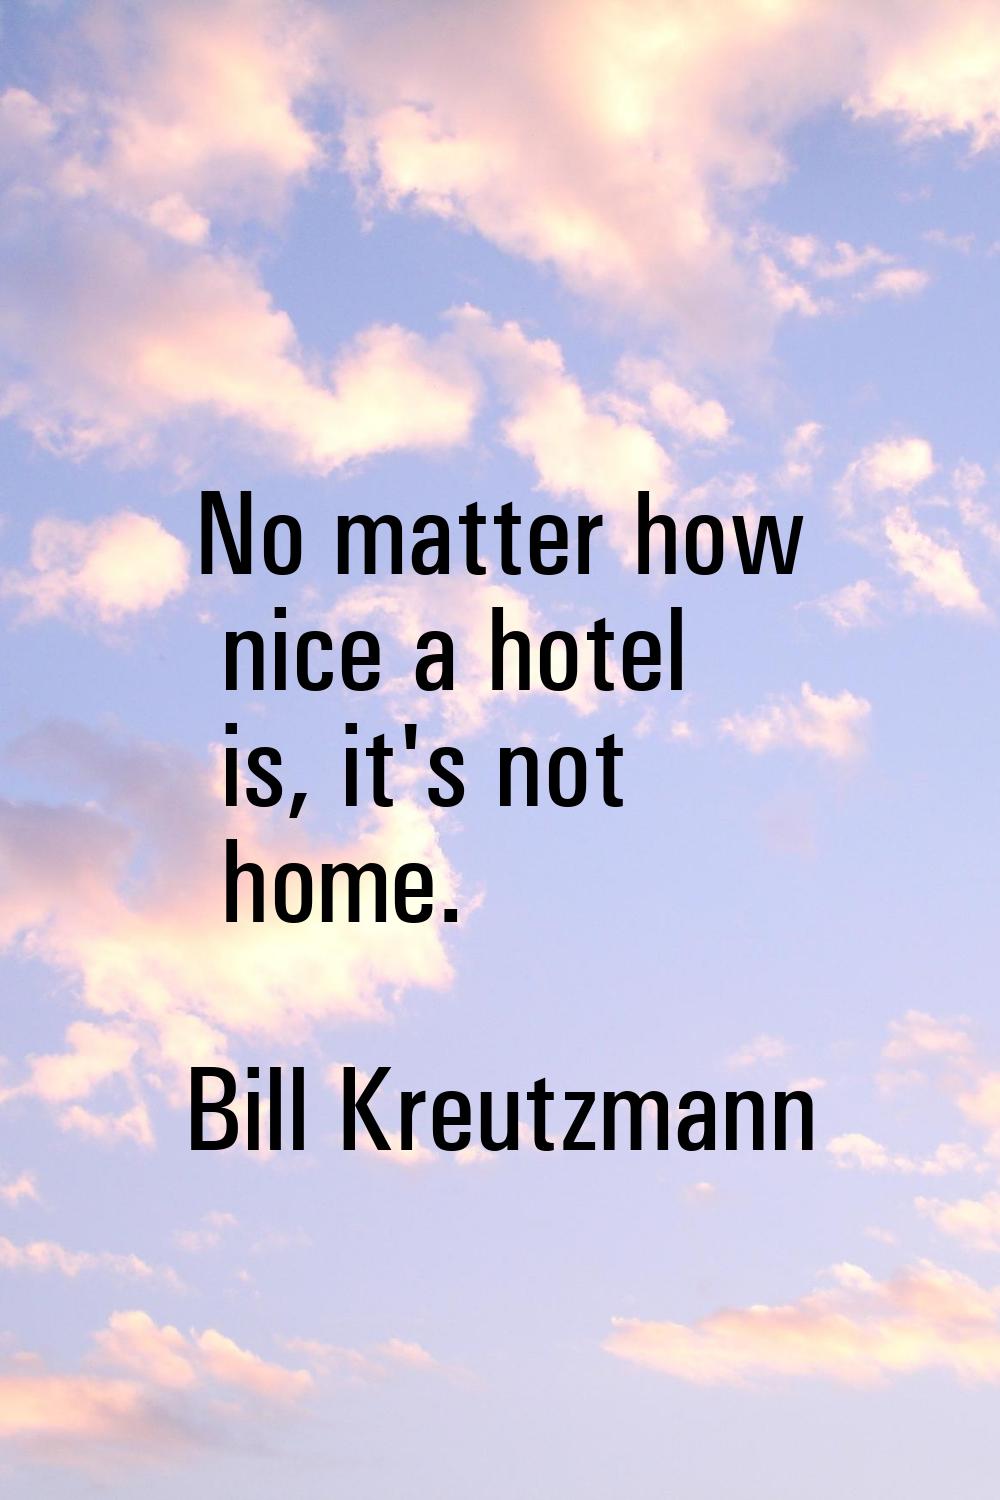 No matter how nice a hotel is, it's not home.